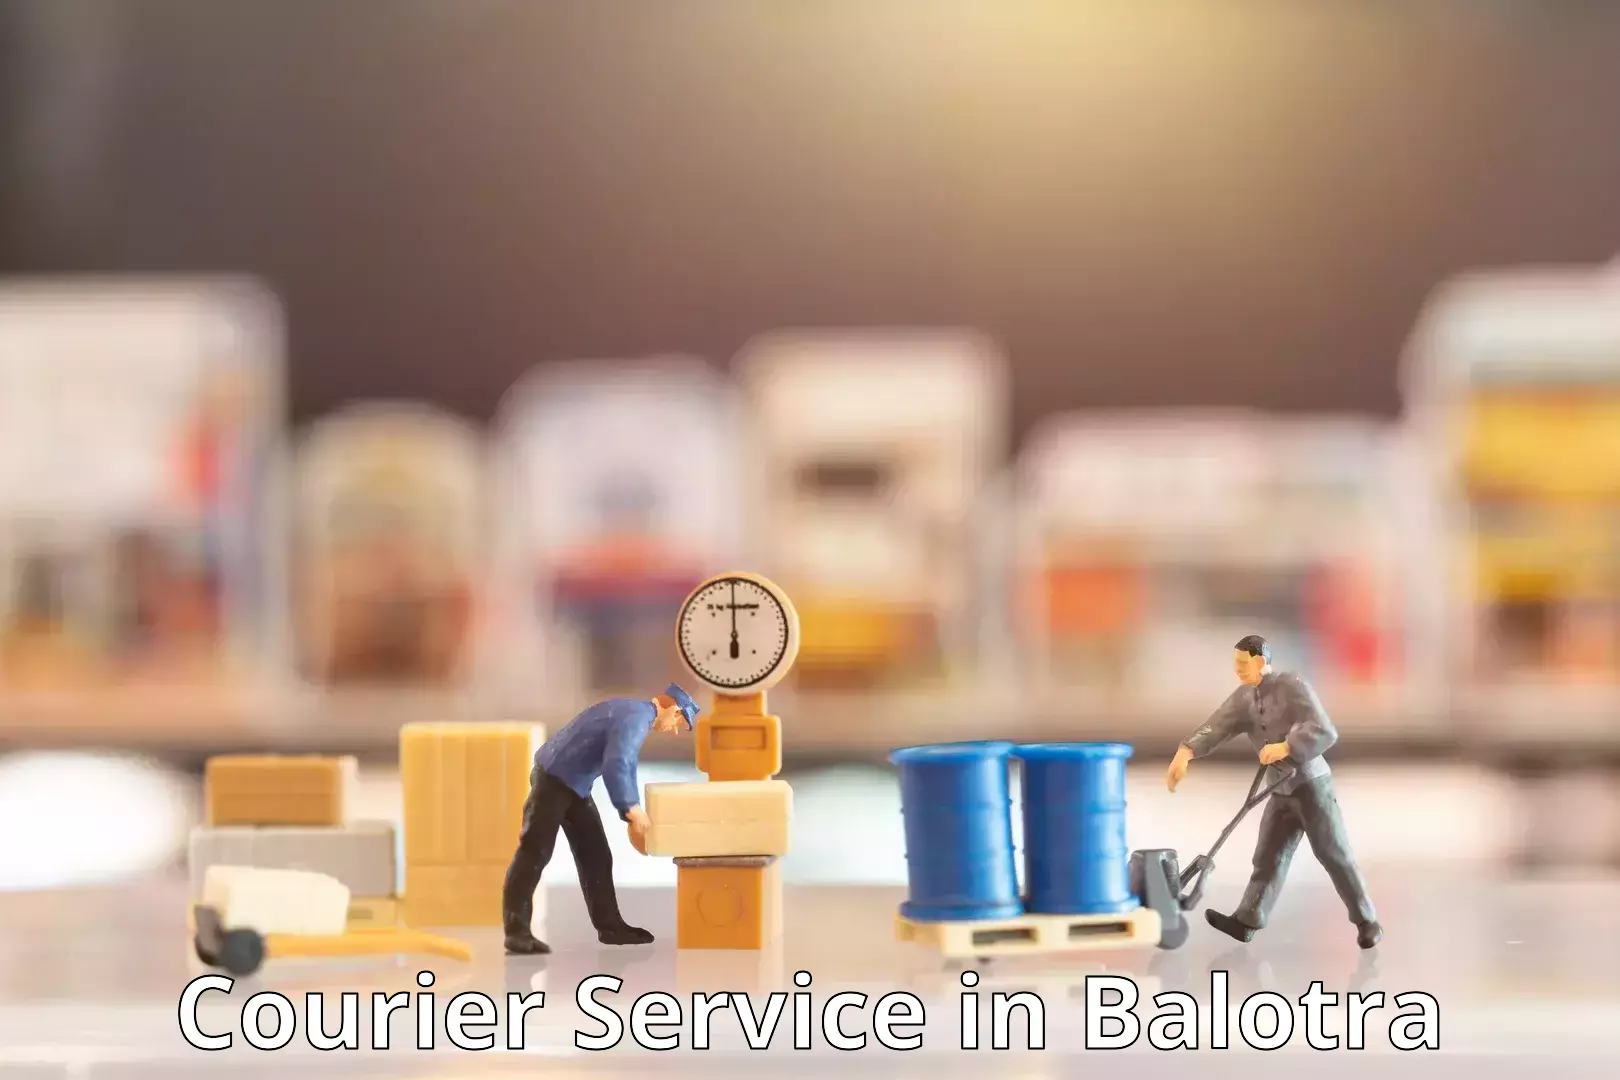 Supply chain delivery in Balotra